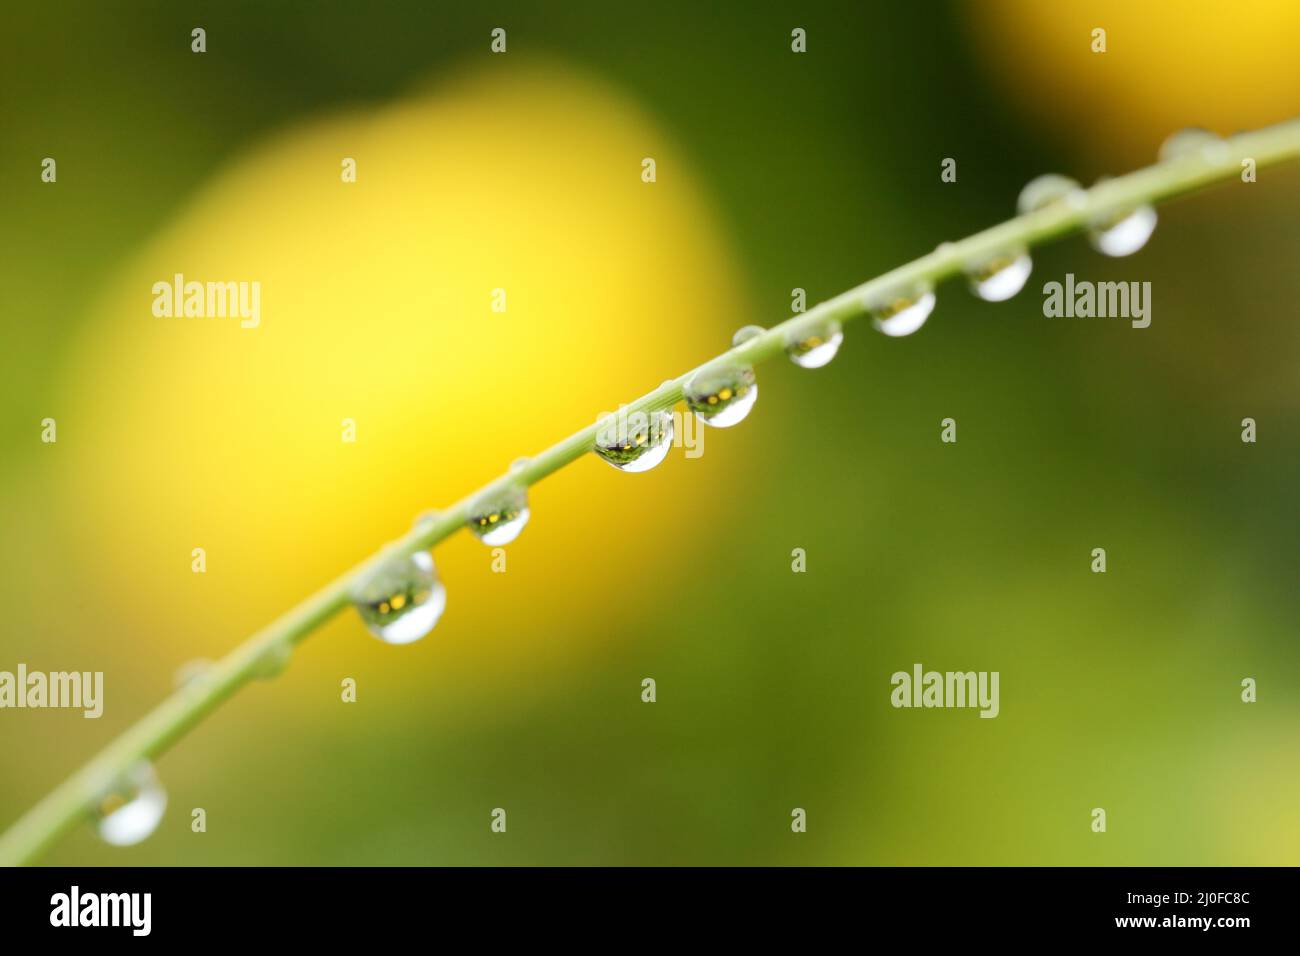 Water drops on grass Stock Photo